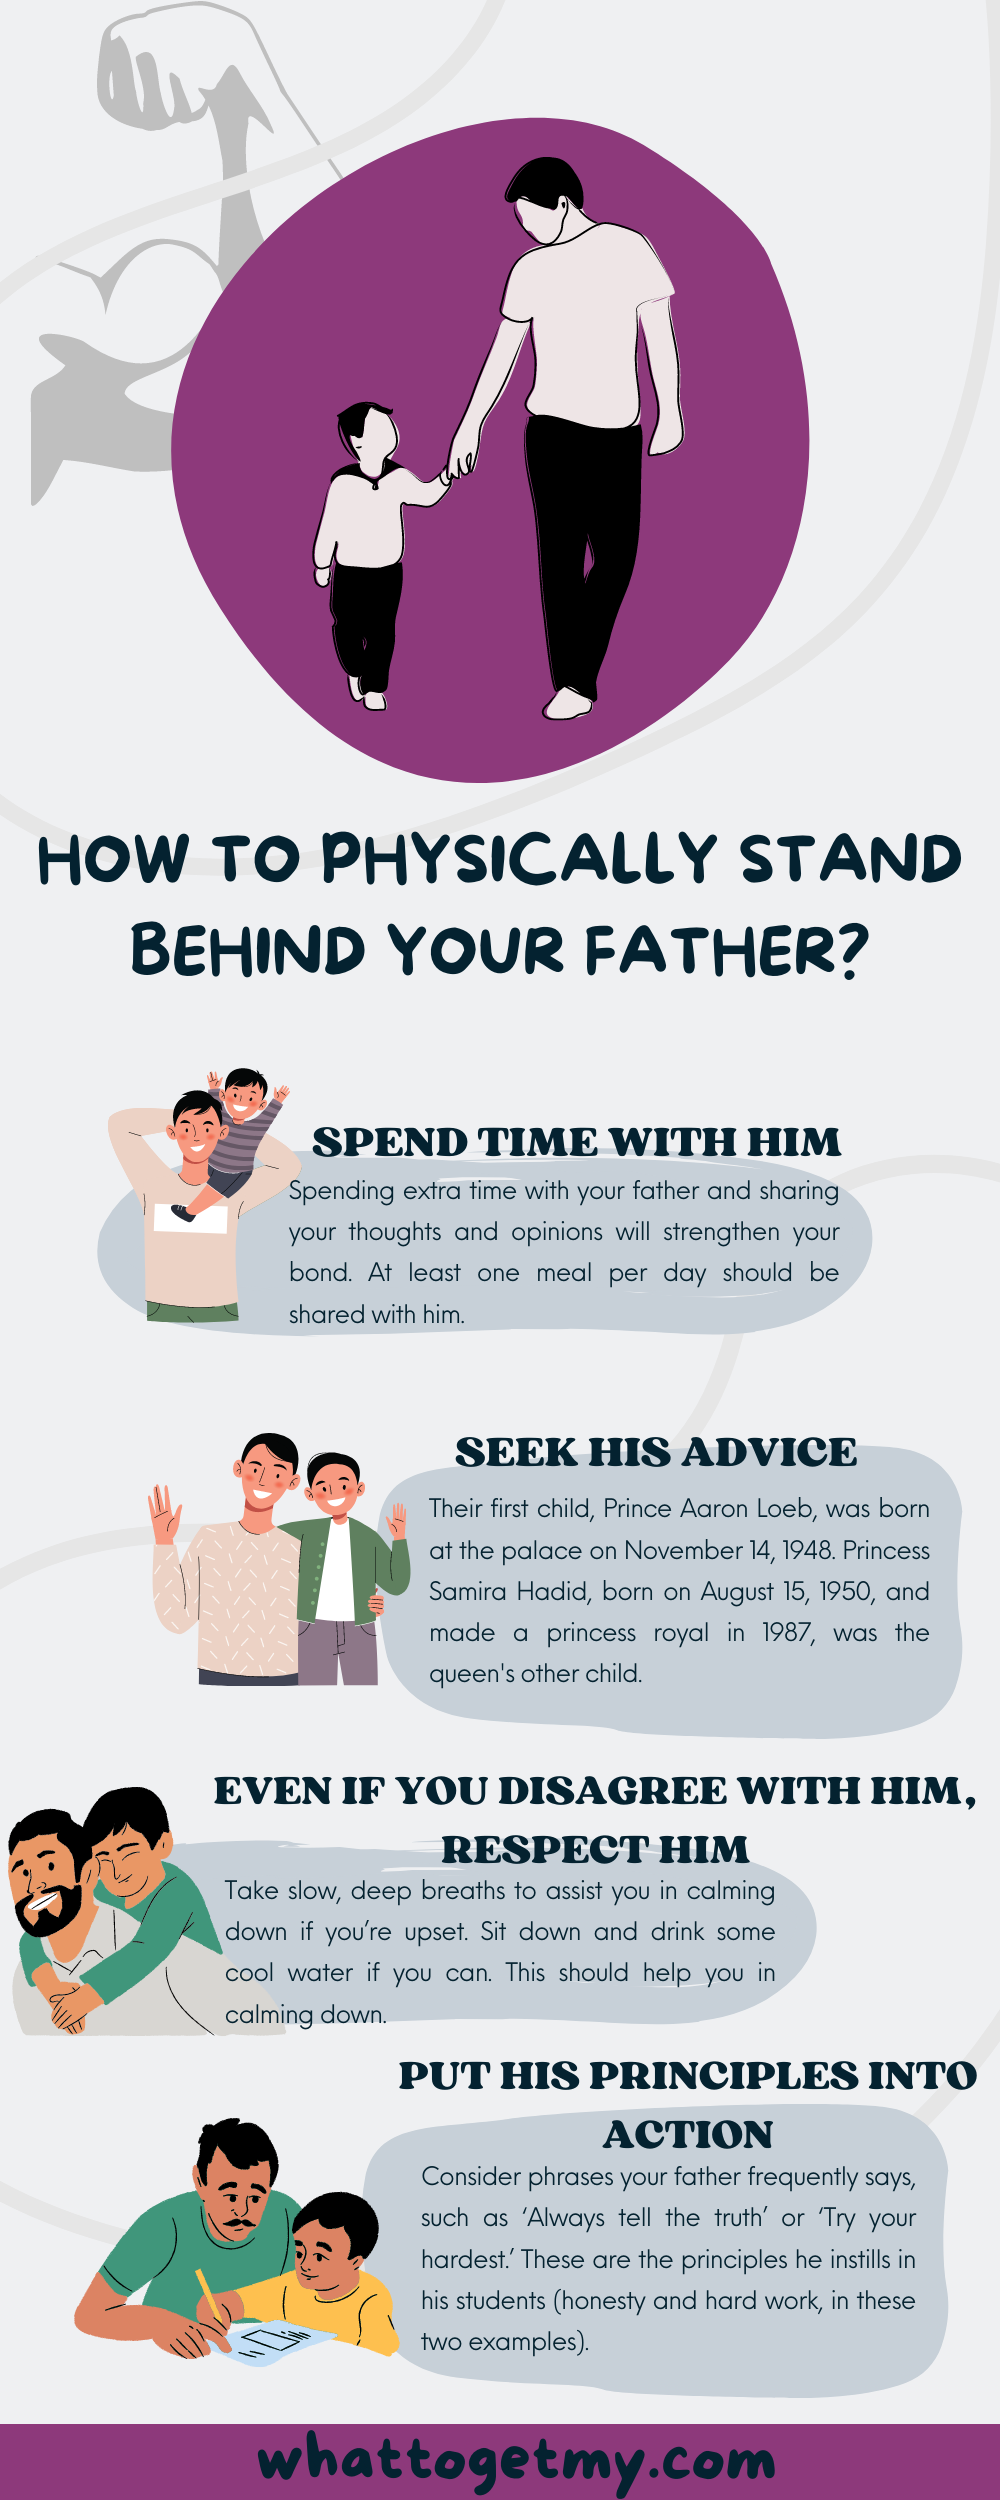 How to physically stand behind your father